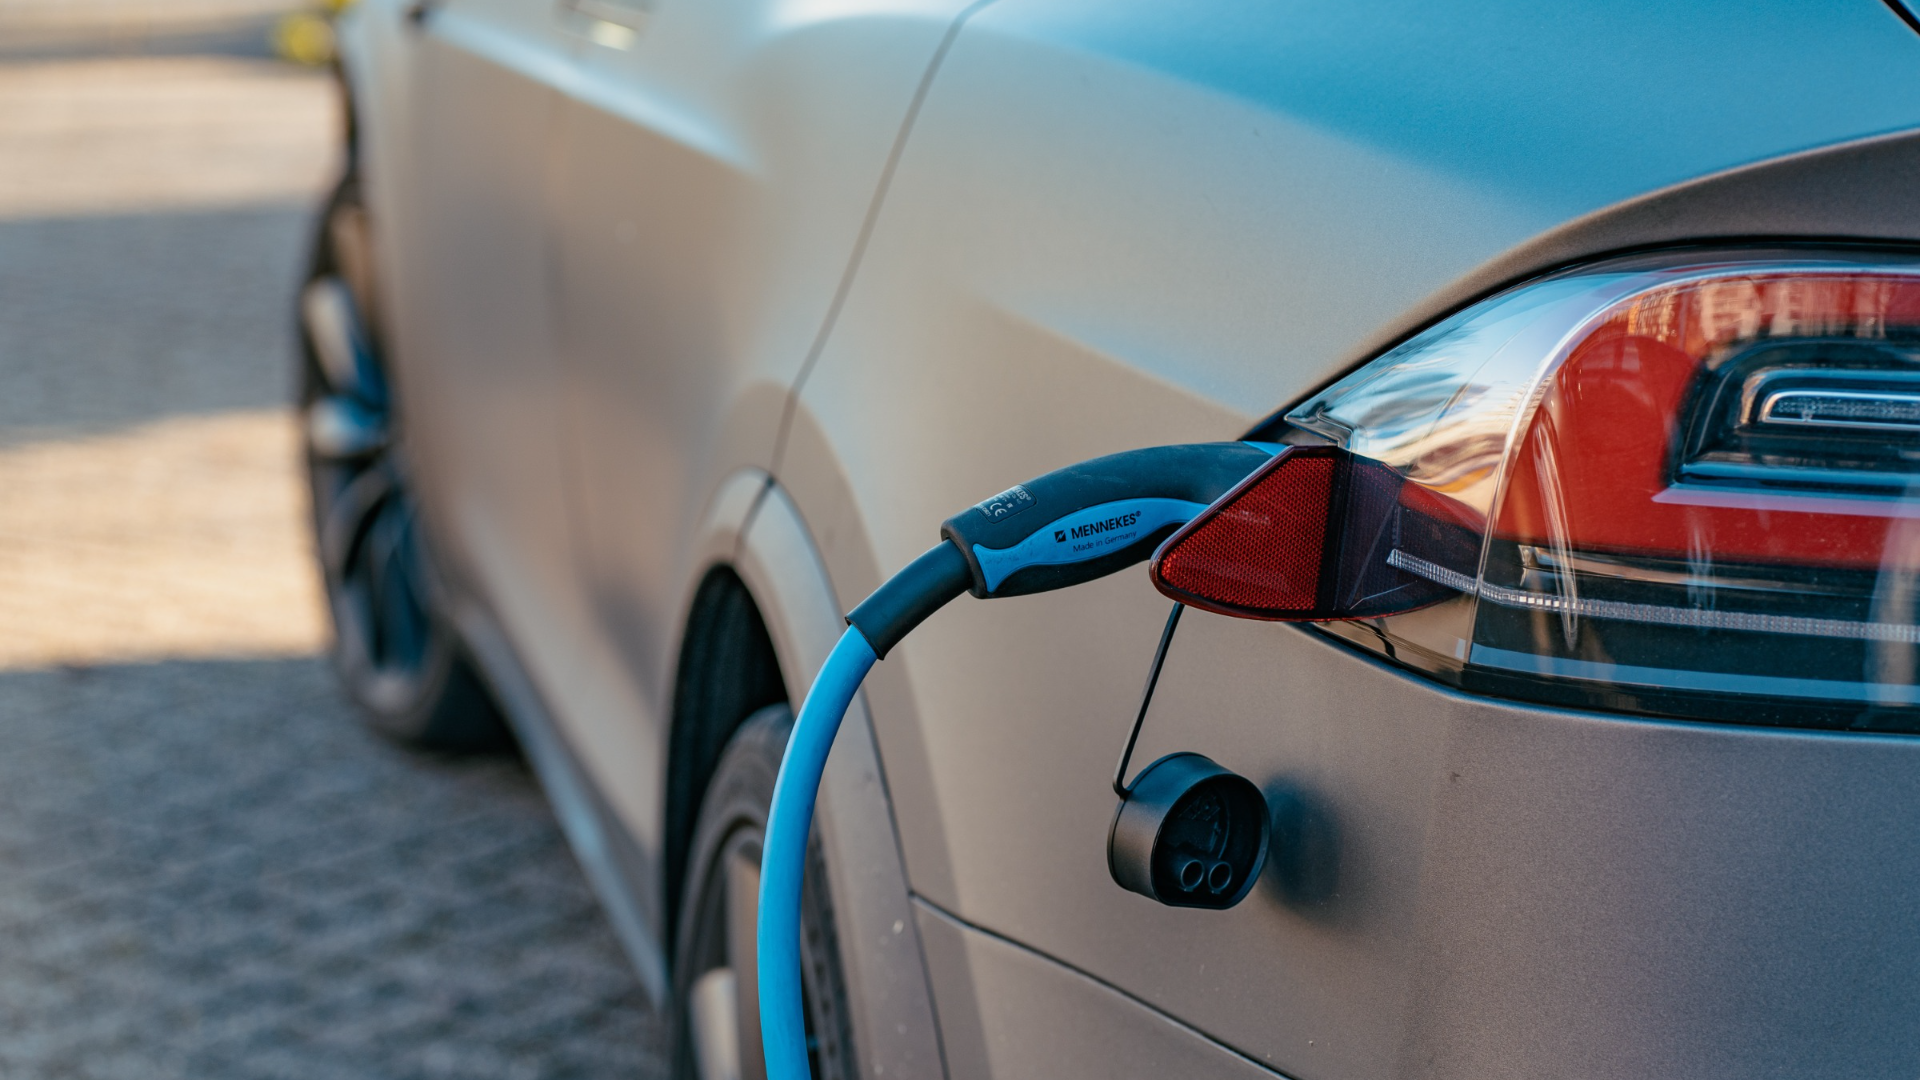 Steering towards an electric future